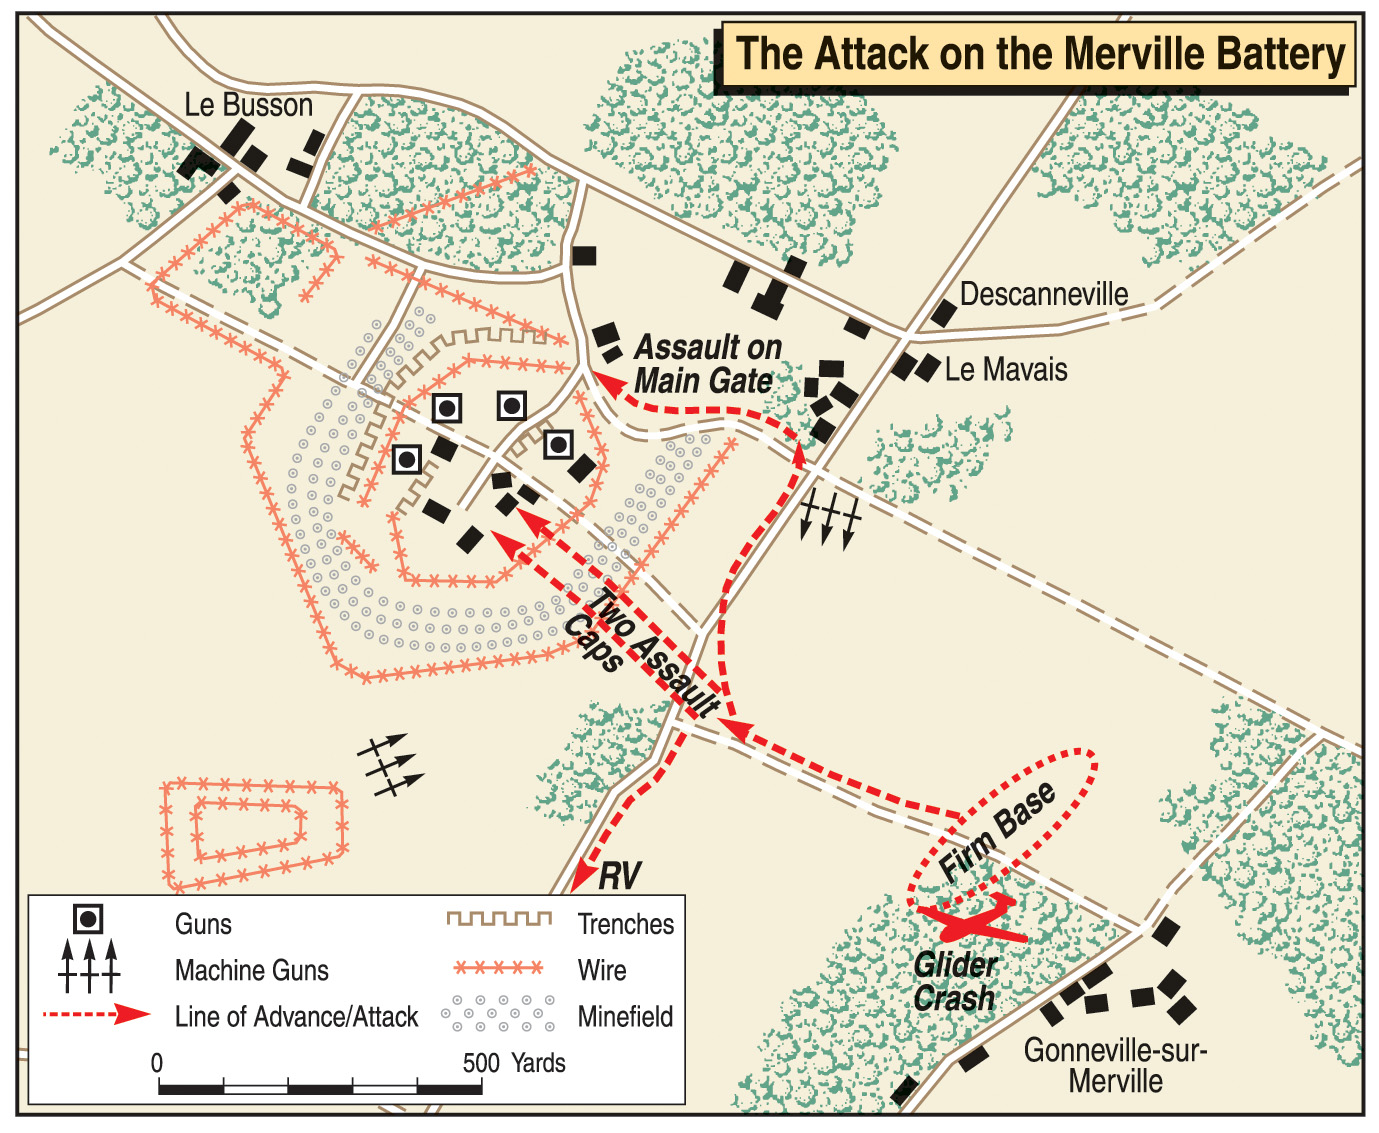 The Merville Battery was heavily fortified with guns, barbed wire, trenches, and minefields.